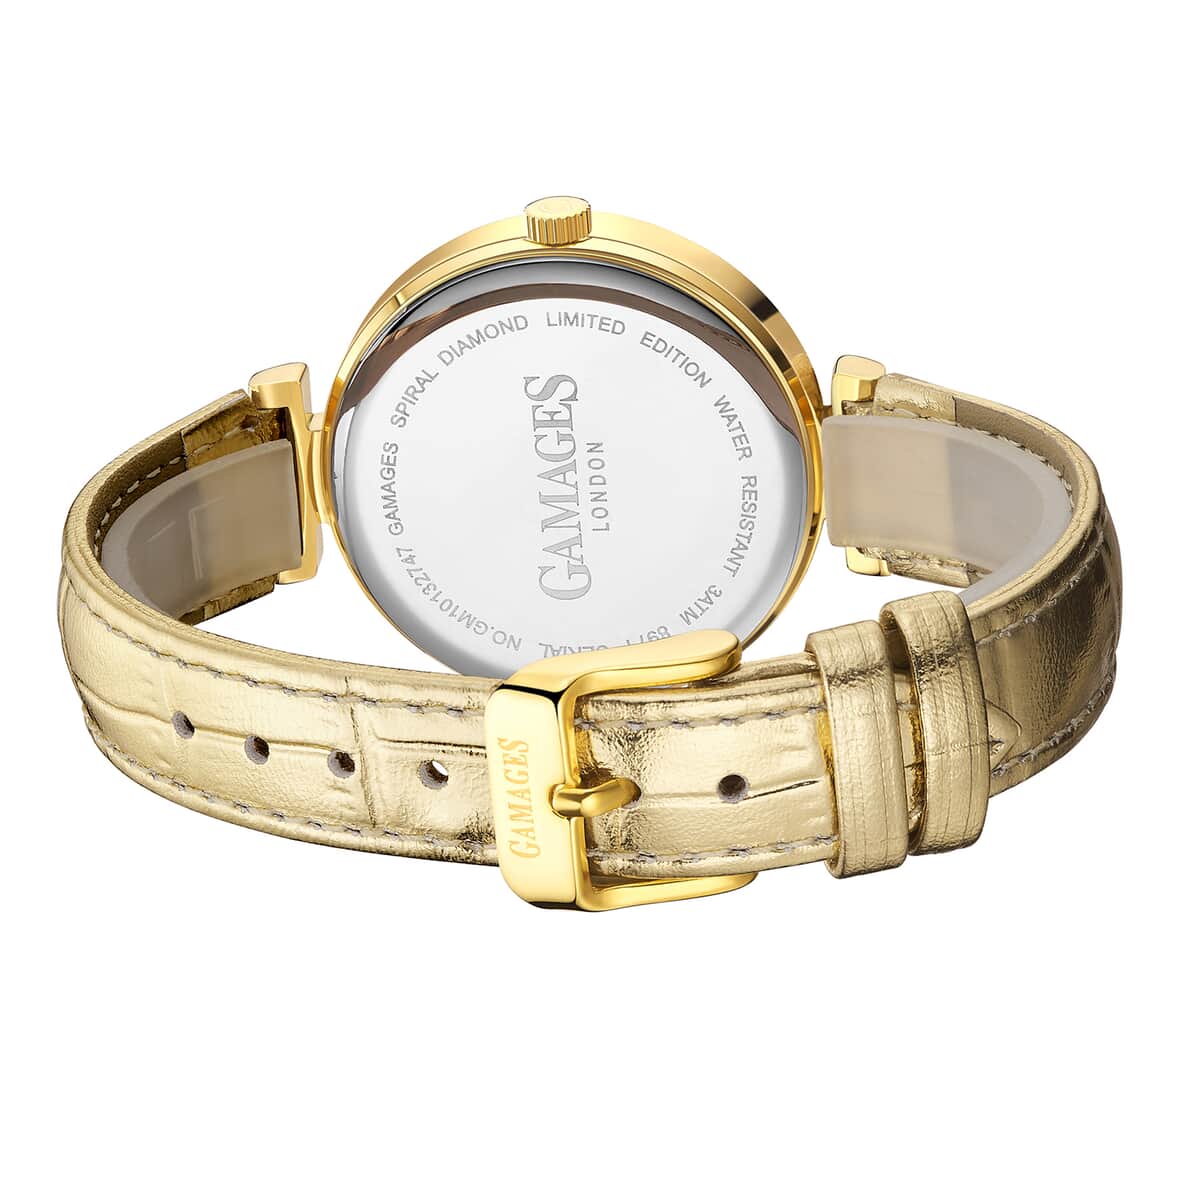 GAMAGES OF LONDON Ladies Spiral Diamond Quartz Chronograph Movement Goldtone Genuine Leather Strap Watch in Gold ION Plating (38mm) image number 3